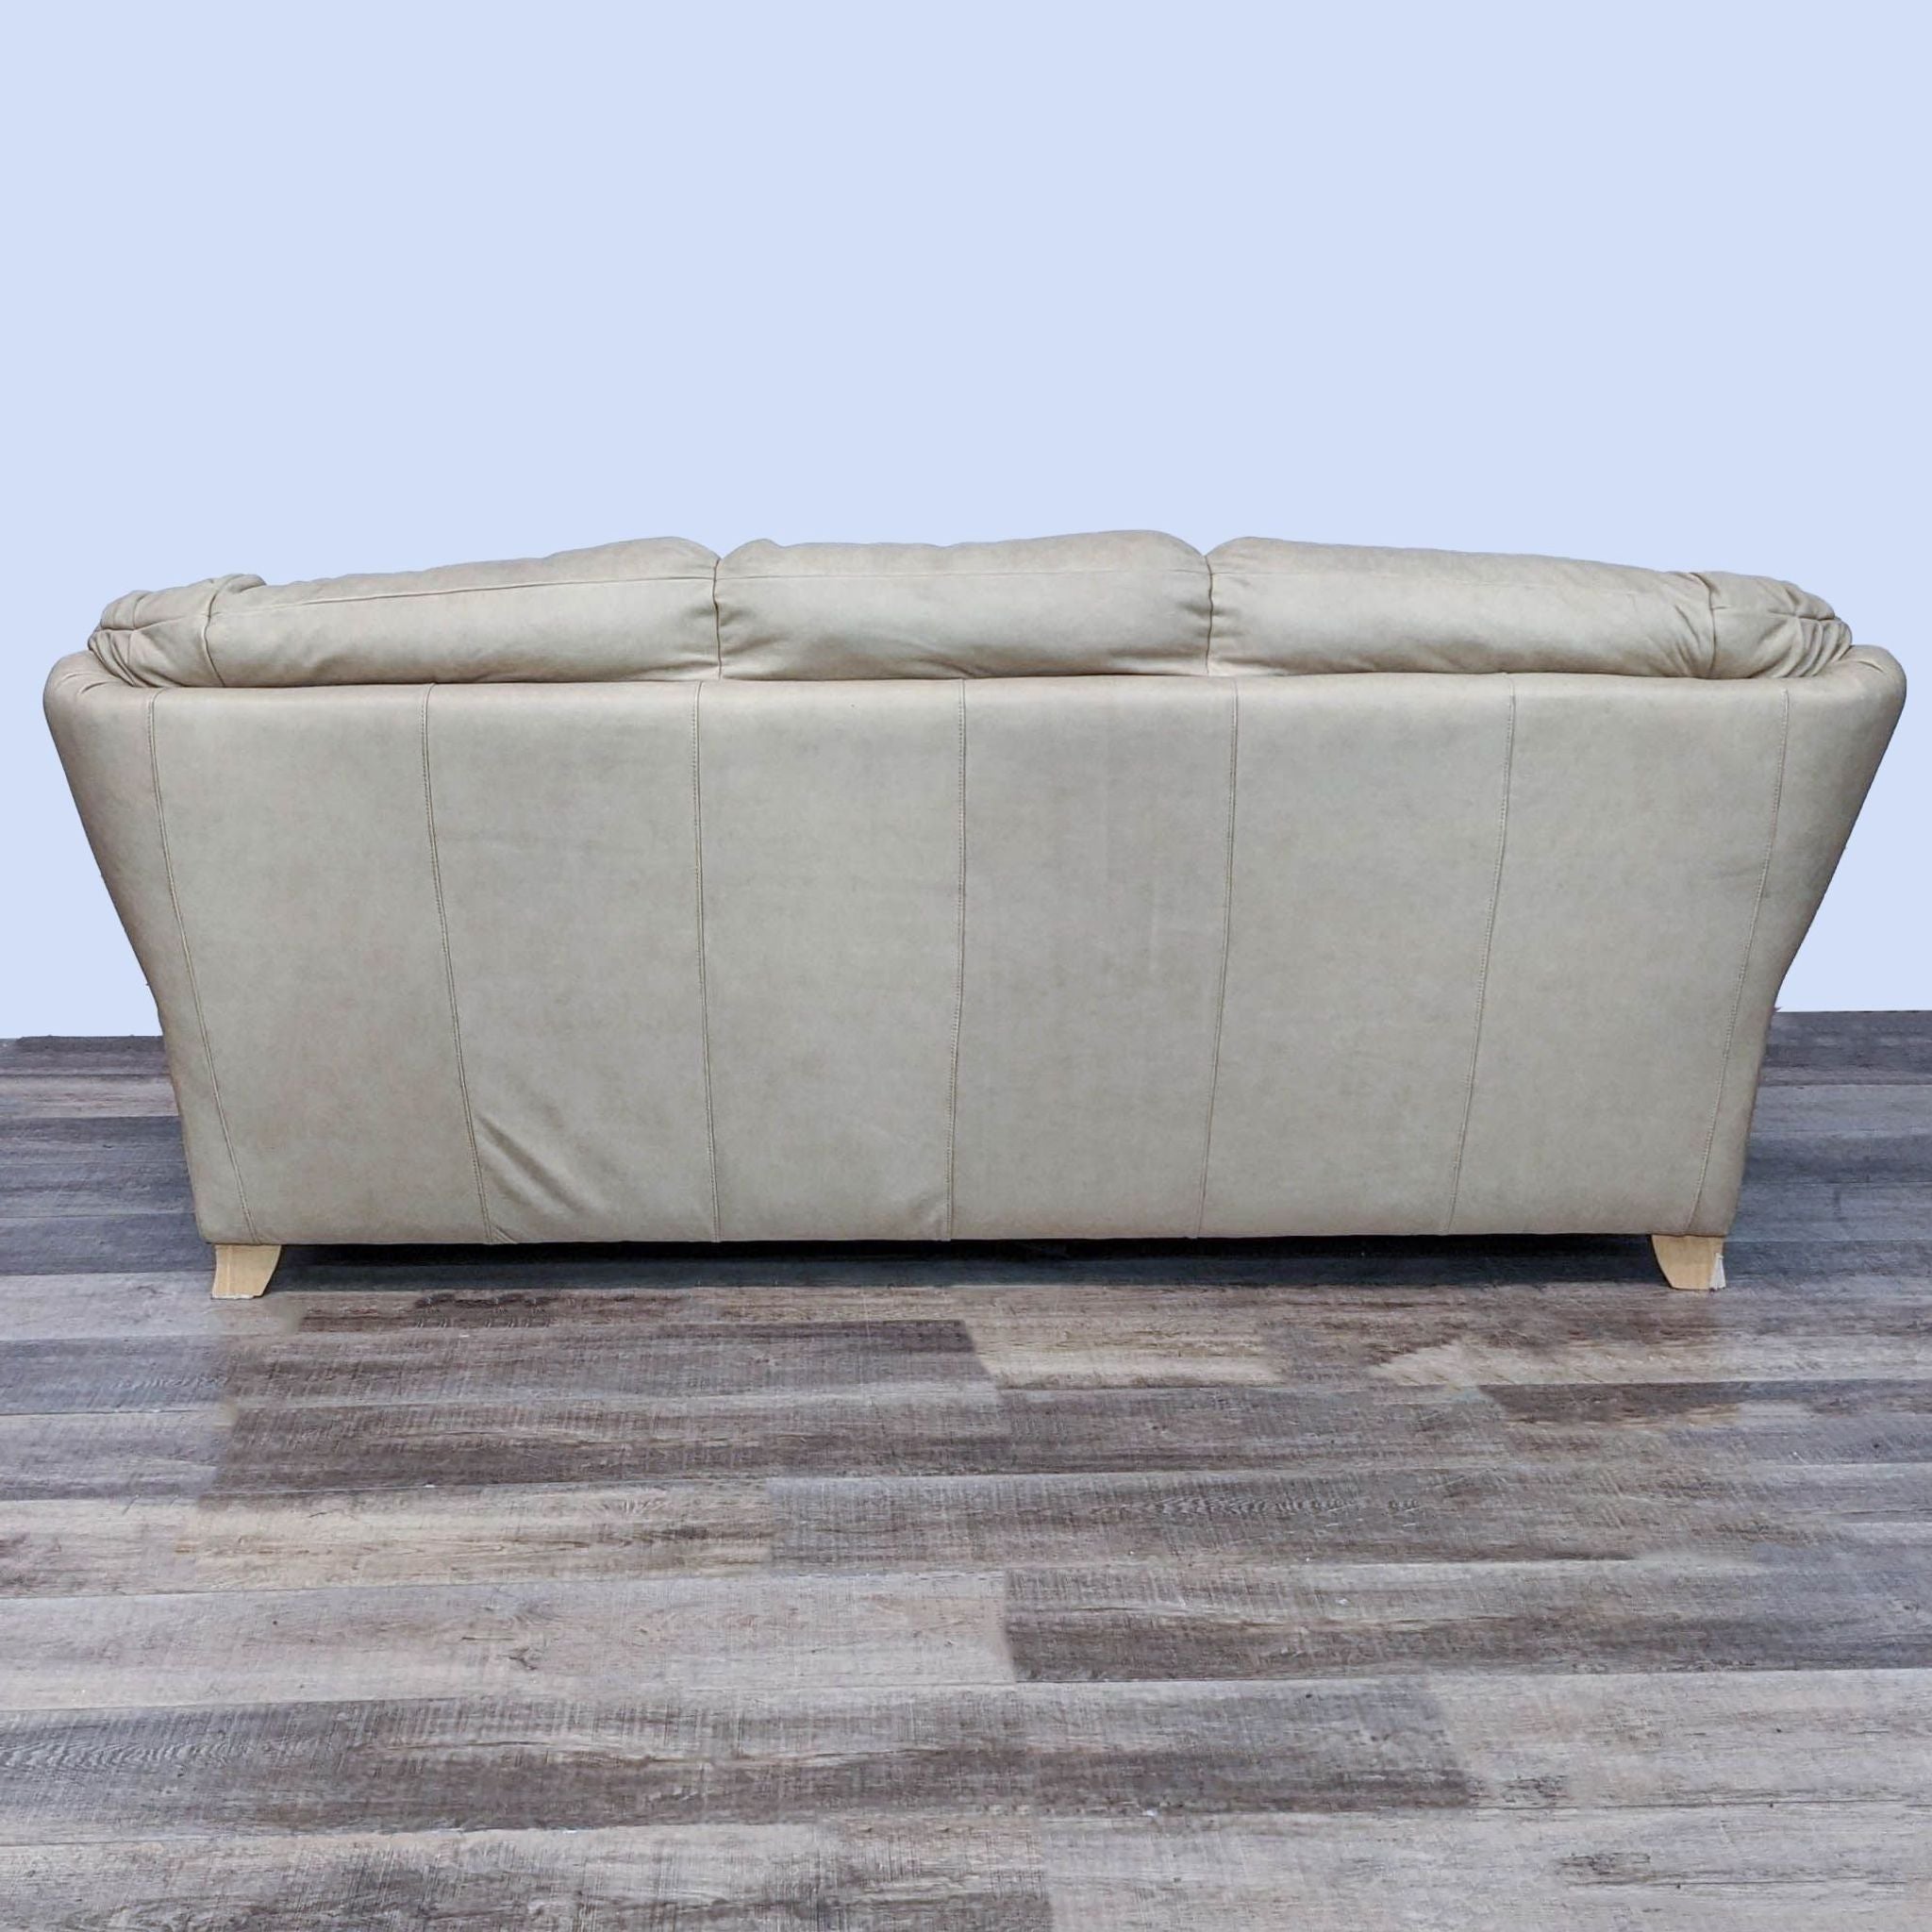 Alt text 2: Rear view of a tan Reperch leather 3-seat sofa showcasing light finish feet and stitched backrest on a grey floor.